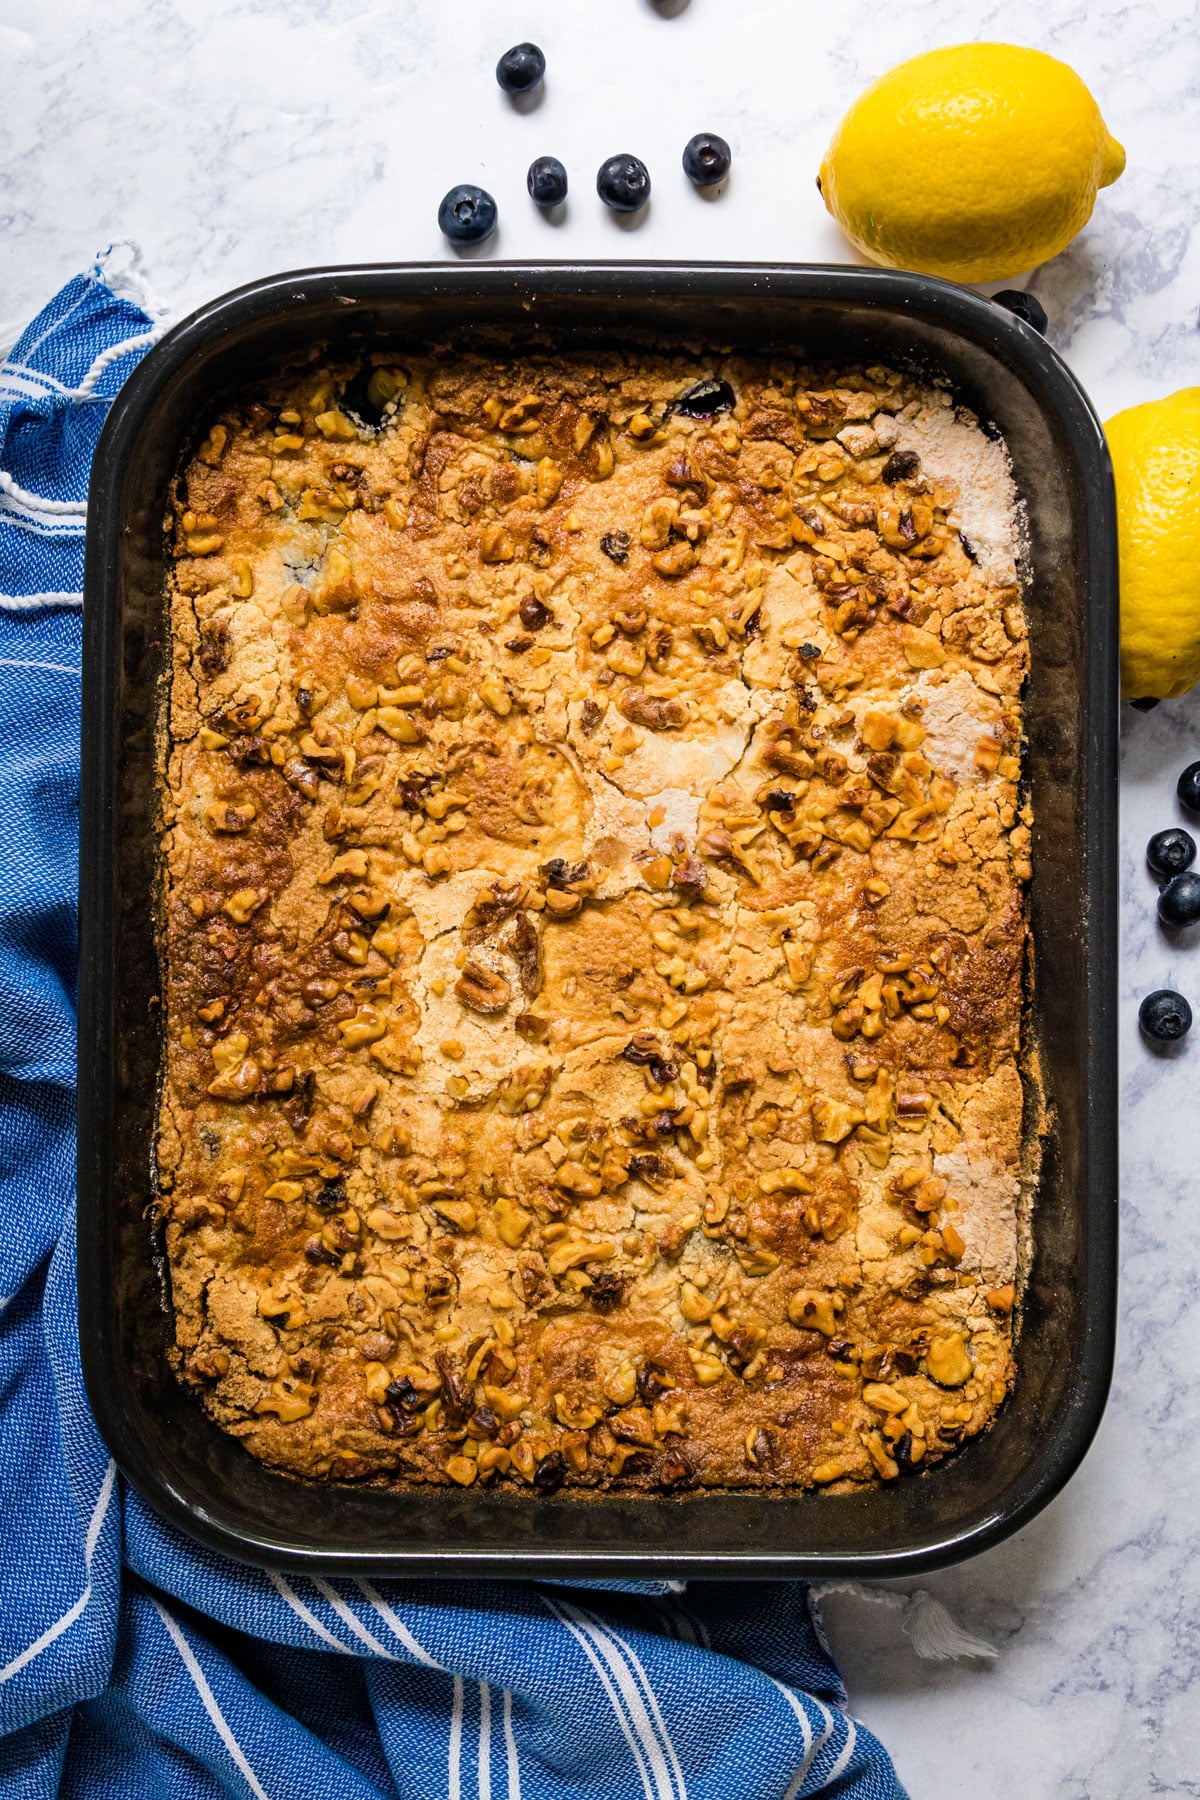 An overhead image featuring the top golden crust of the dump cake in a dark pan with a blue and white striped towel, blueberries and lemons around it.